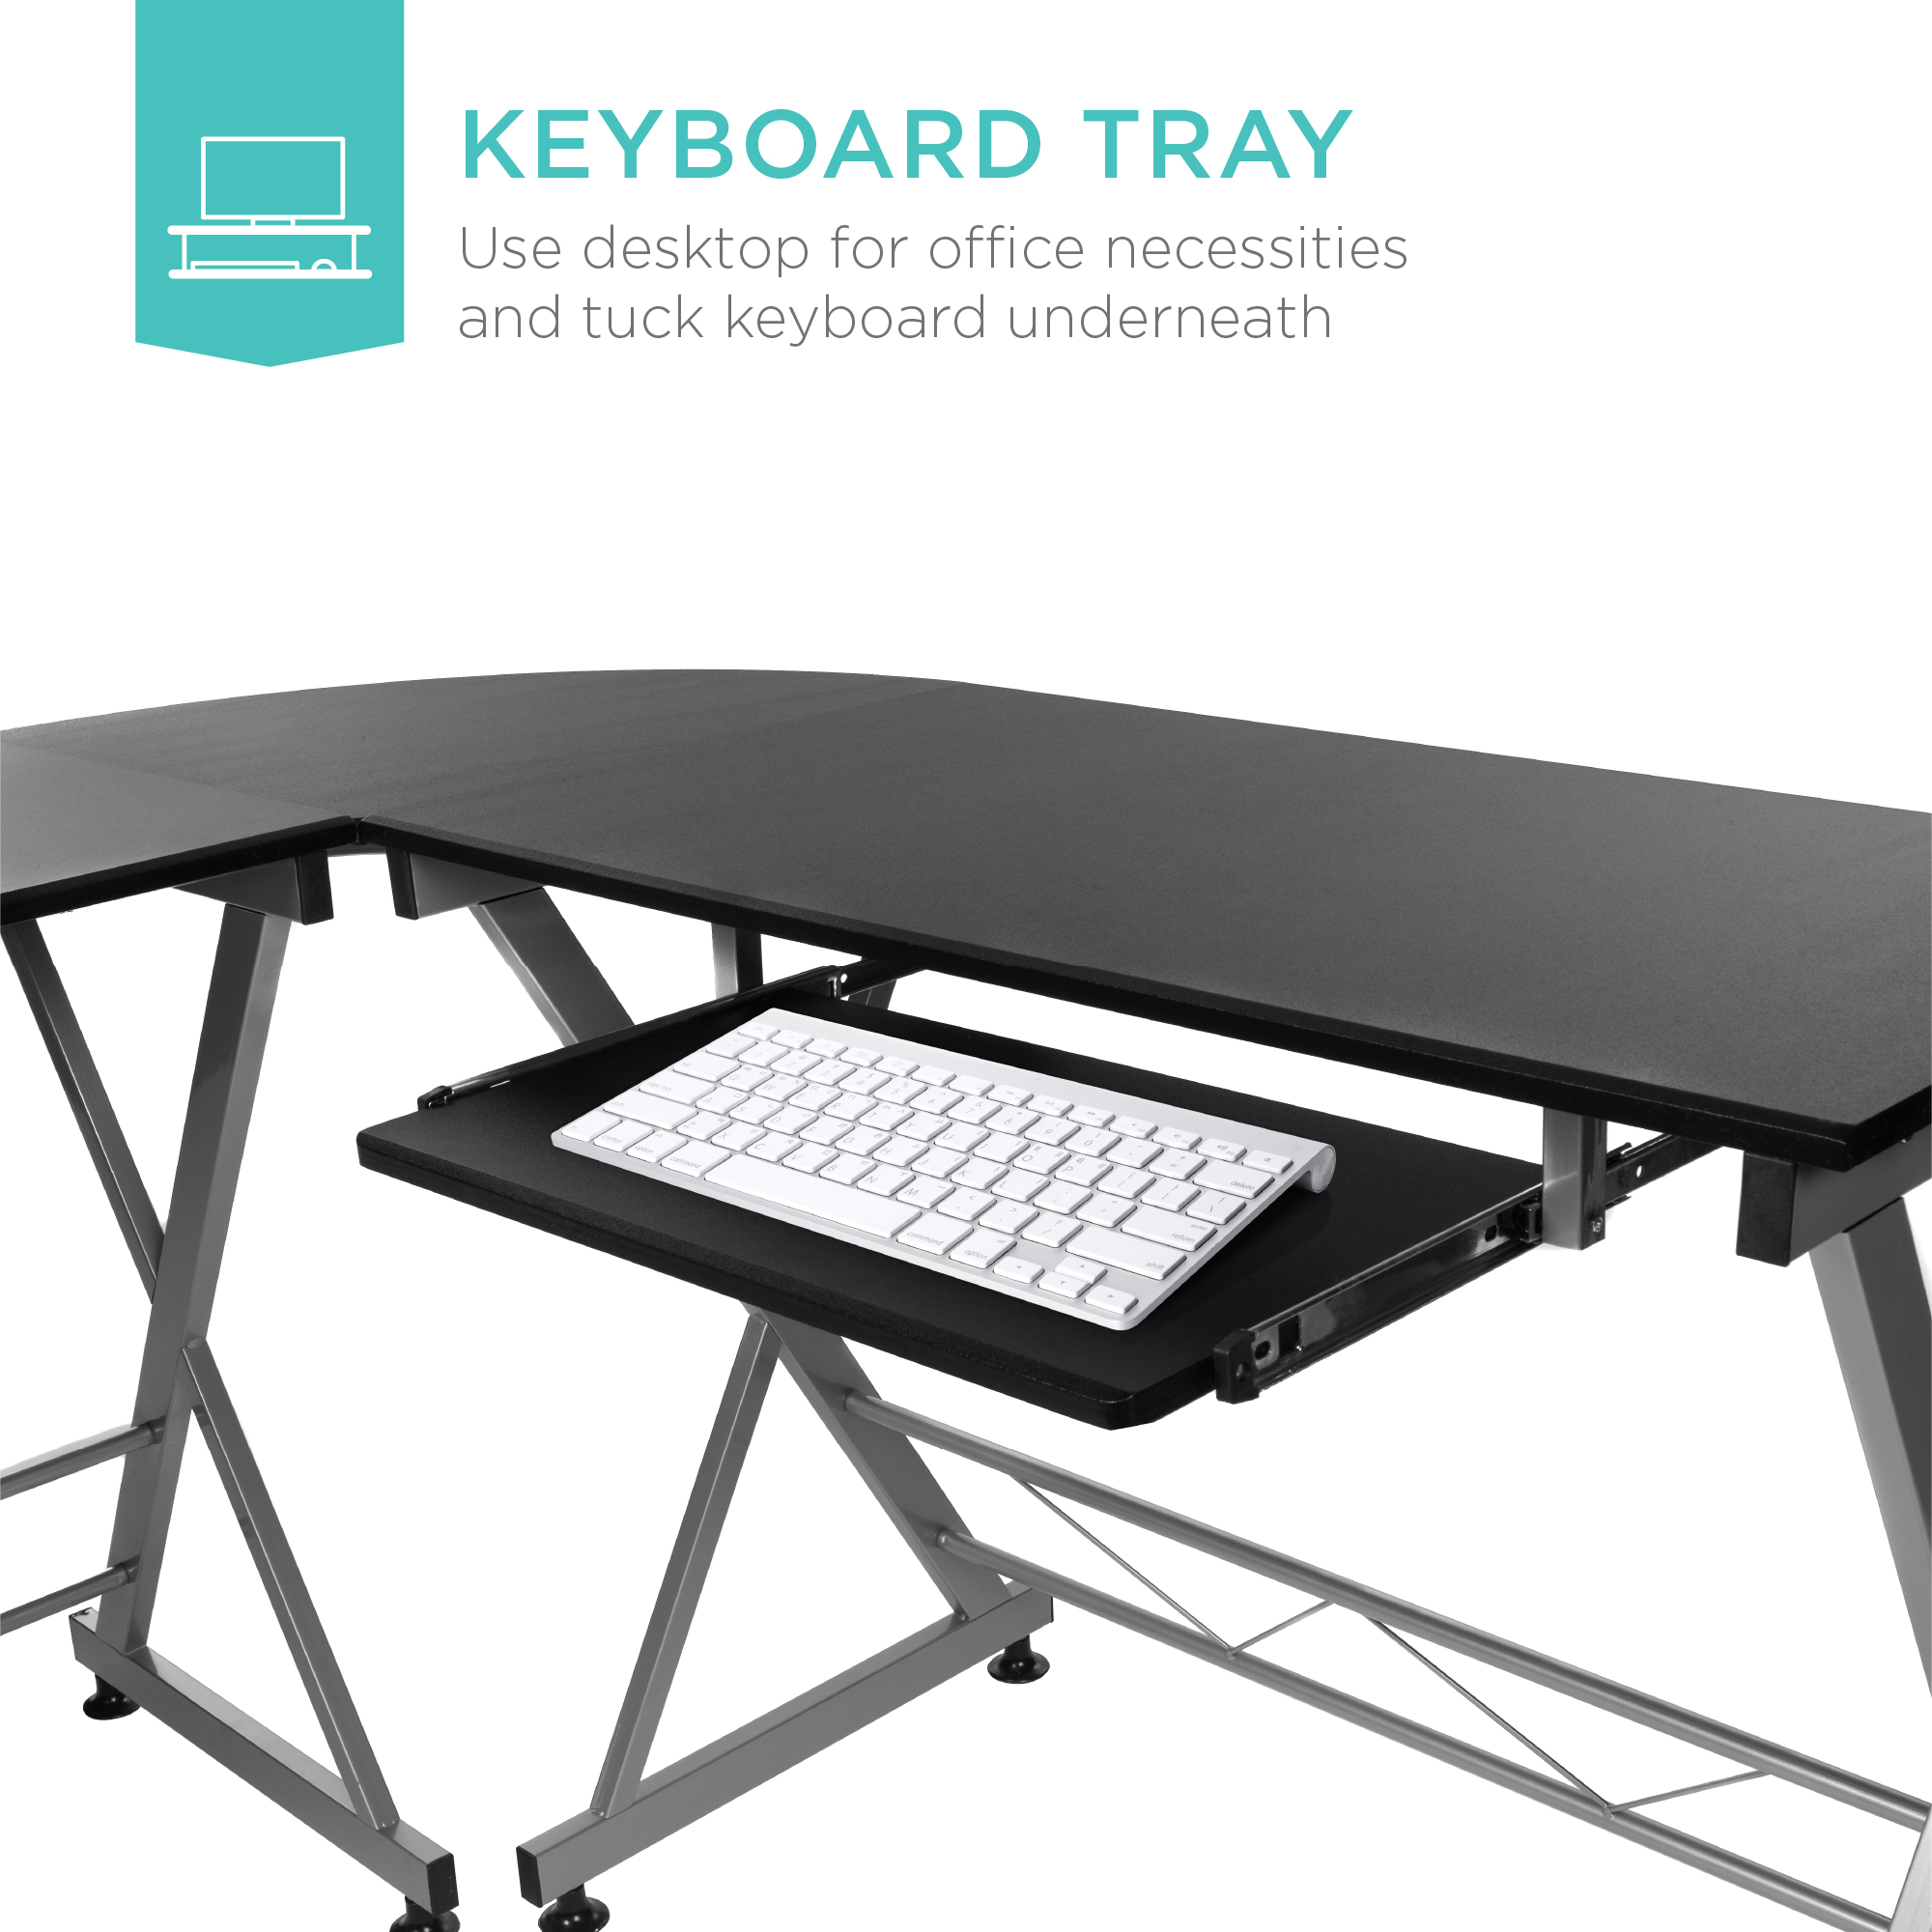 Best Choice Products Modular L-Shape Desk Workstation for Home, Office w/ Wooden Tabletop Keyboard Tray - Black - image 4 of 7